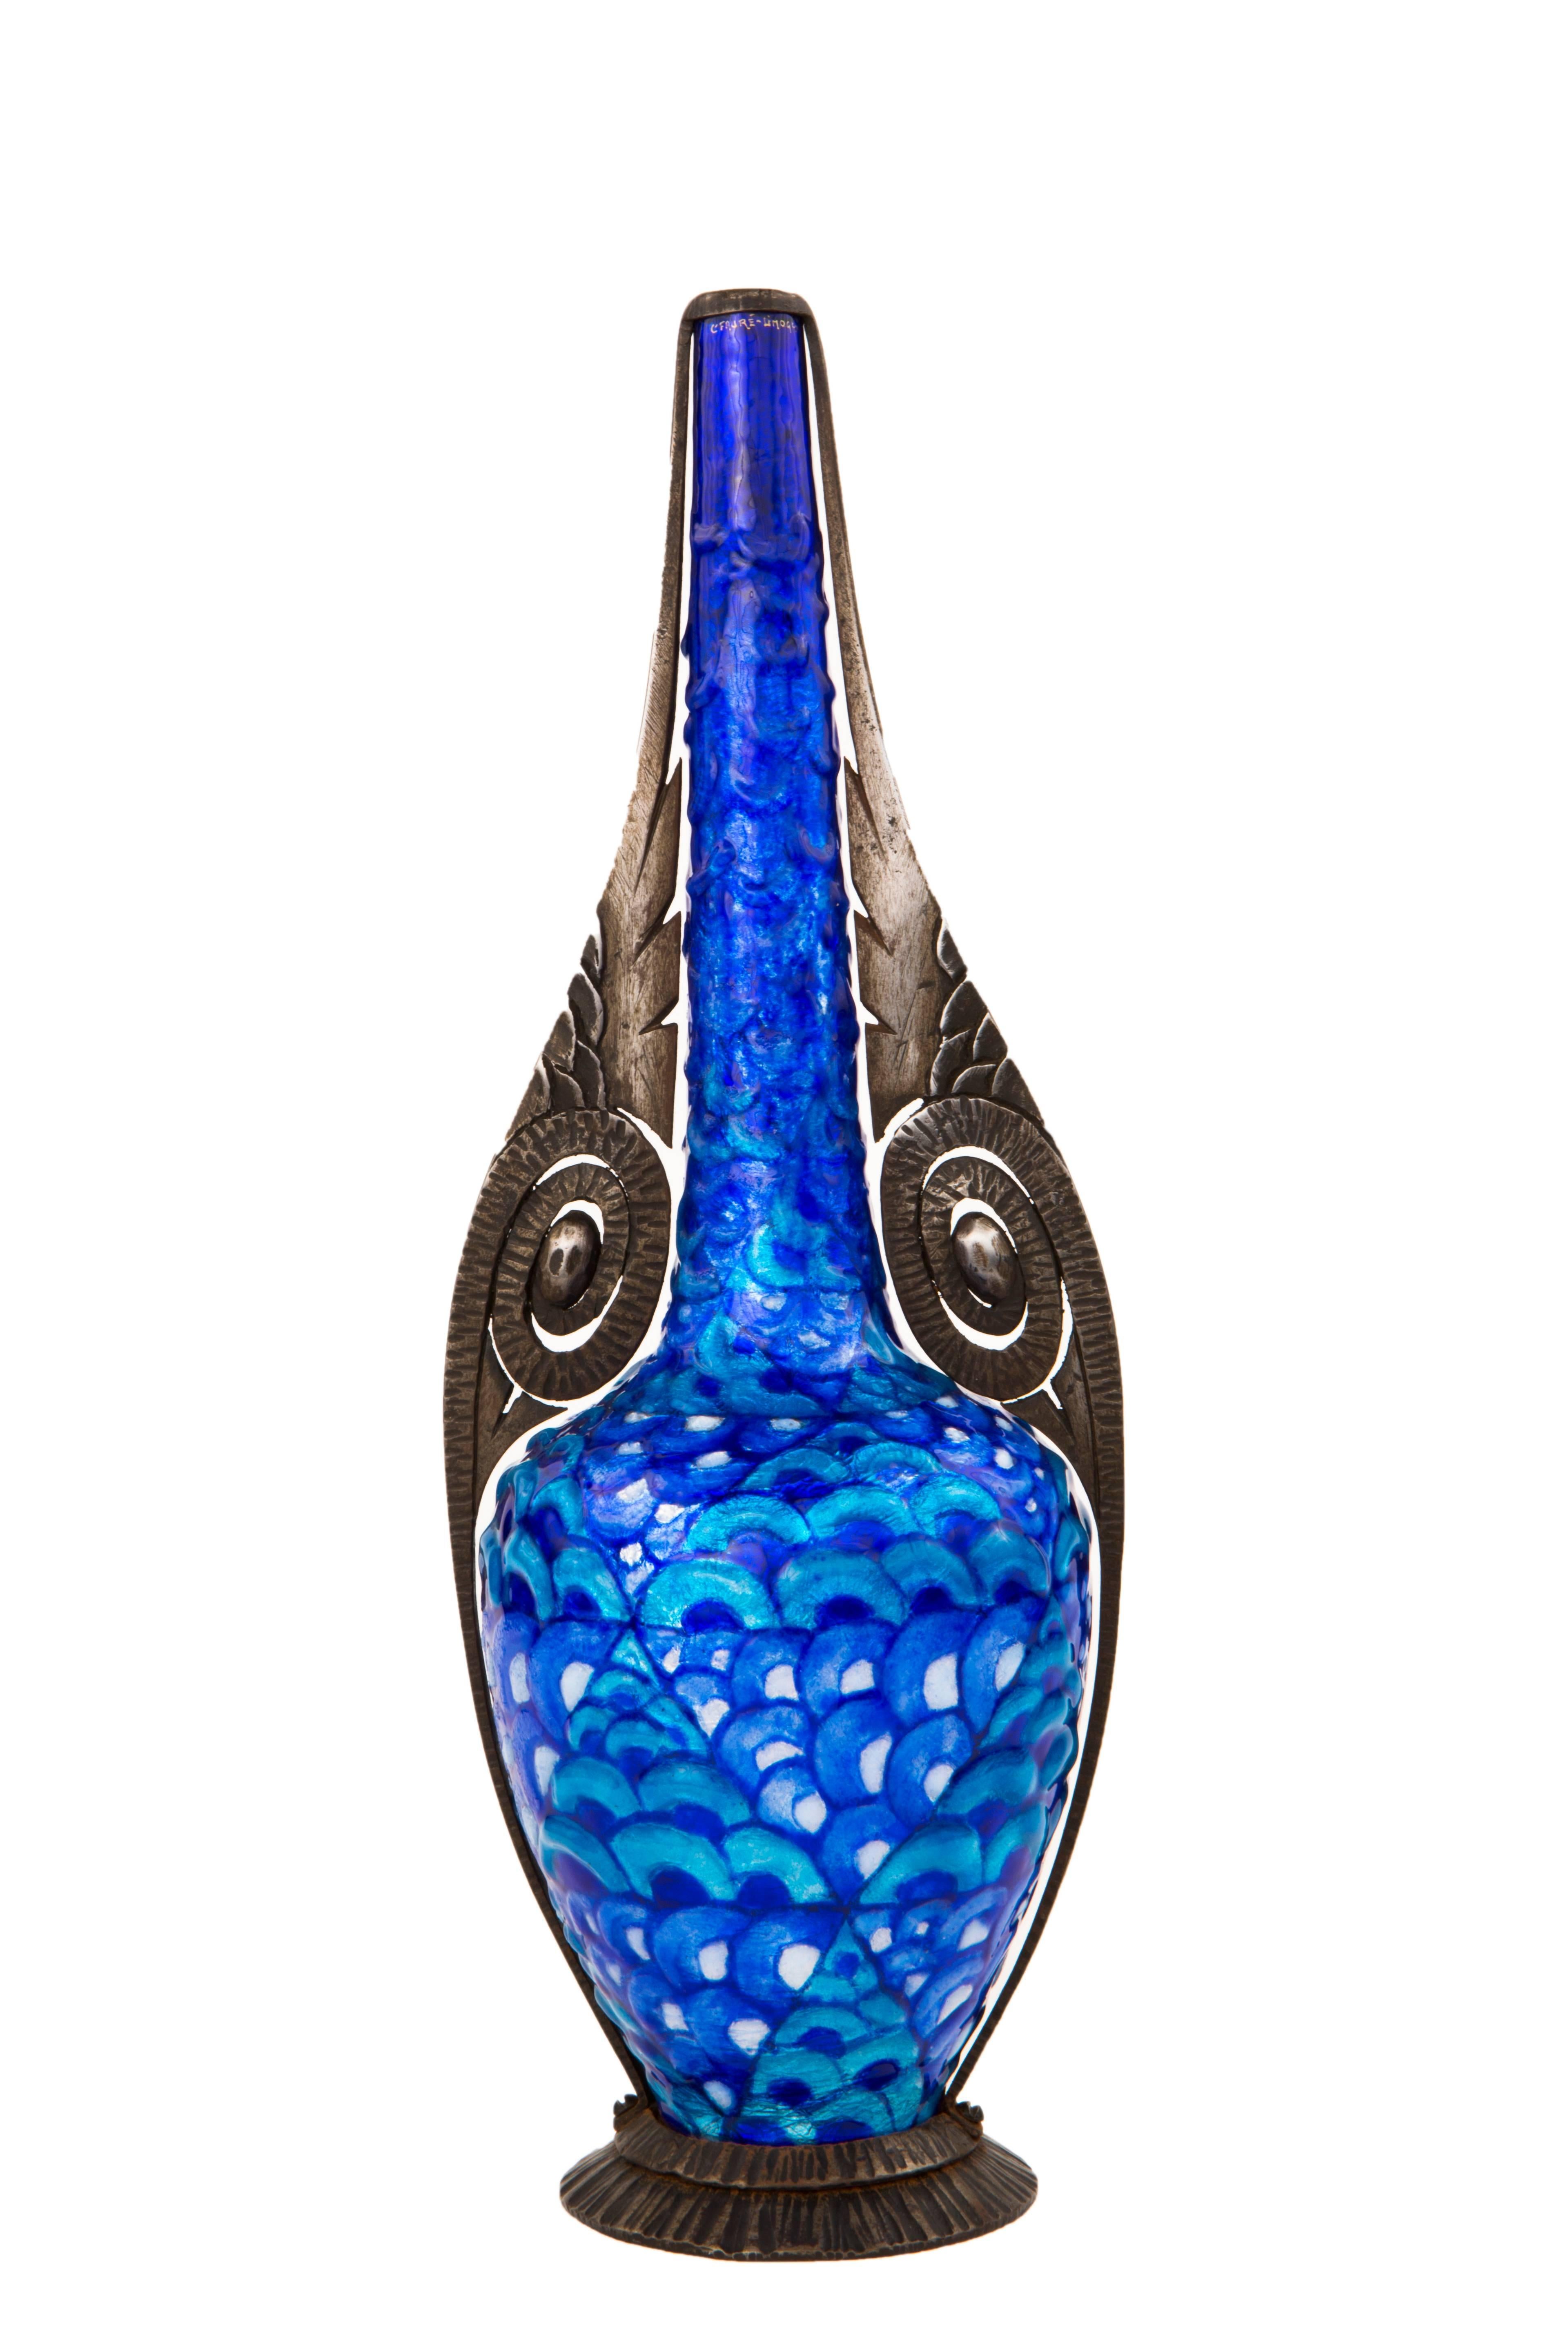 French Art Deco Enameled and Wrought Iron Decorated Vase by Camille Fauré 1